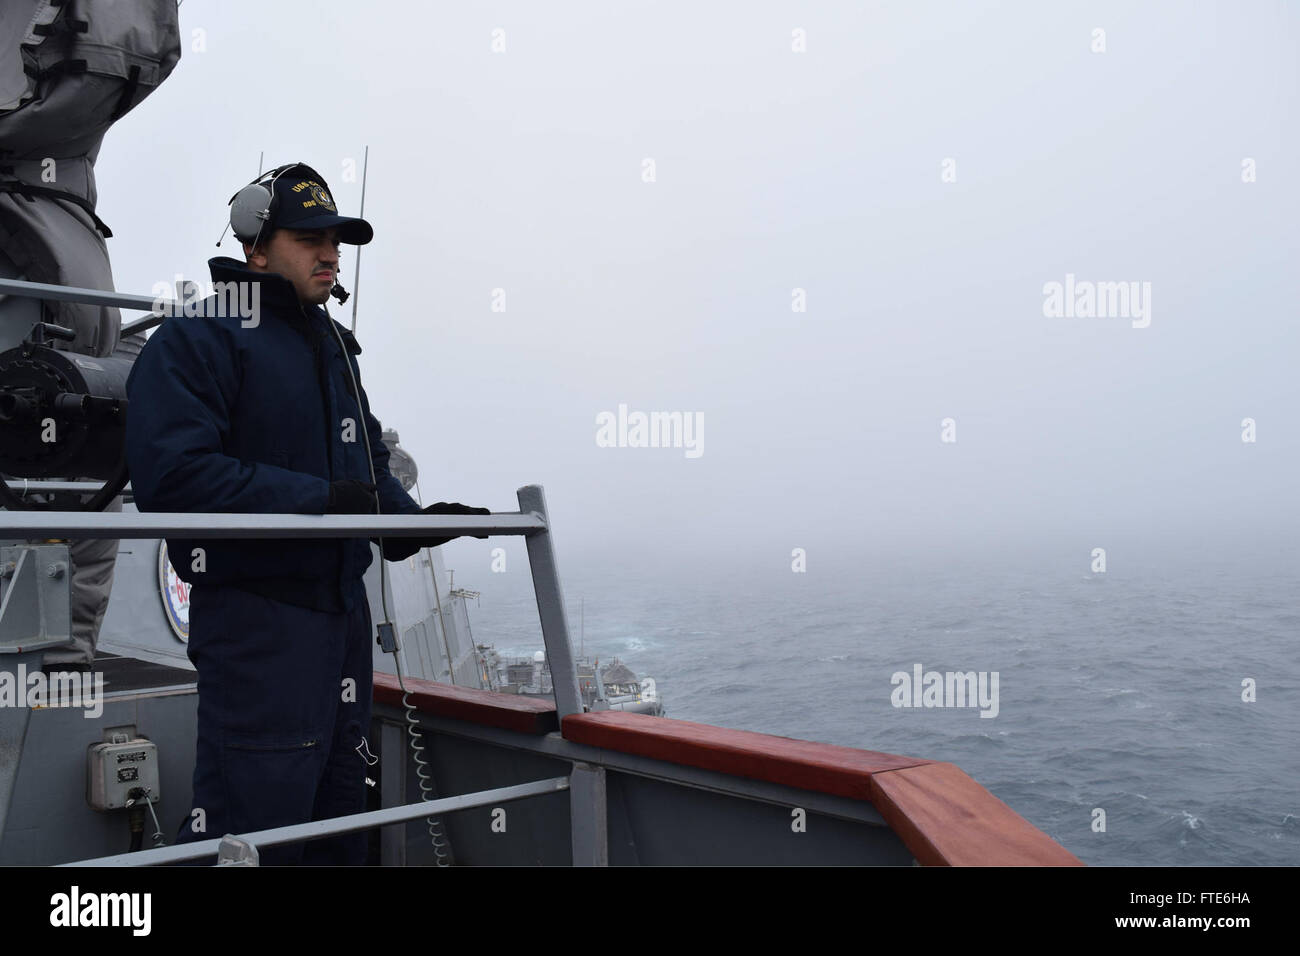 151118-N-ZT773-003 ATLANTIC OCEAN (Nov. 18, 2015) Ship’s Serviceman 2nd  Class Isaac Payne of Elyira, Ohio, stands as low visibility lookout aboard USS Carney (DDG 64) Nov. 18, 2015. Carney, an Arleigh Burke-class guided-missile destroyer, forward deployed to Rota, Spain, is conducting a routine patrol in the U.S. 6th Fleet area of operations in support of U.S. national security interests in Europe. (U.S. Navy photo by Lt. j.g. Jessica Bronson/ Released) Stock Photo